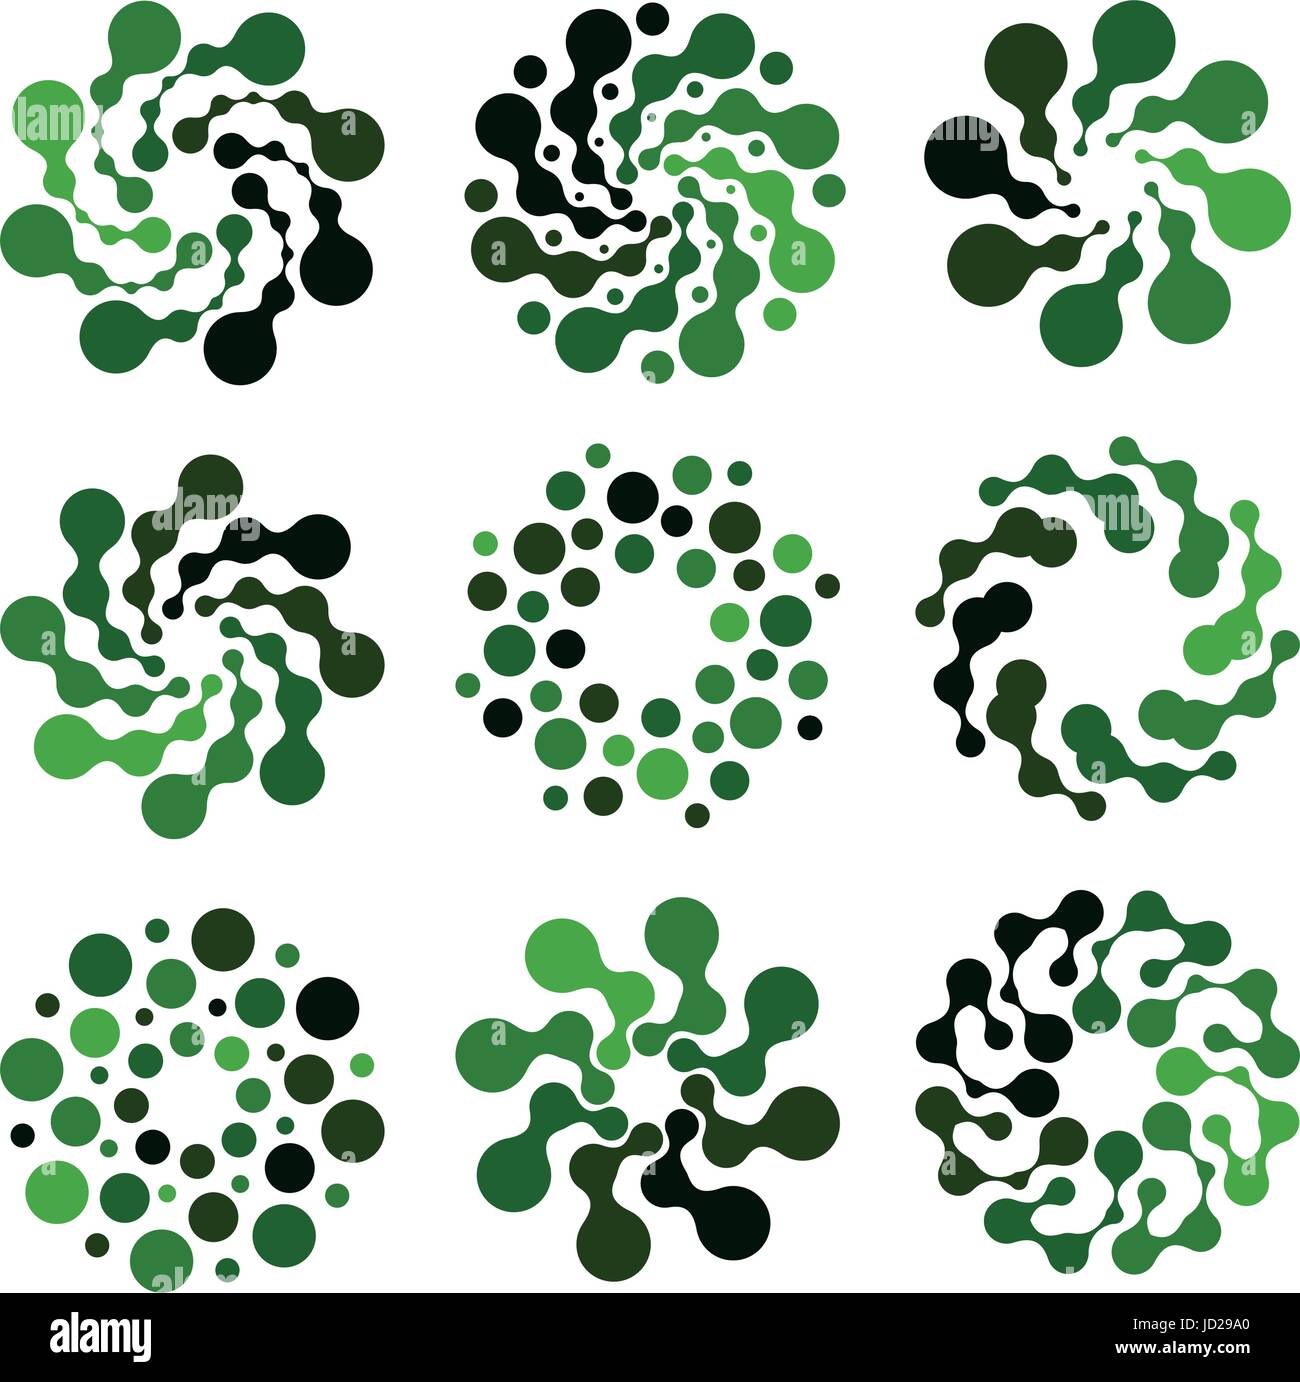 Isolated abstract green color round shape logo set on white background, simple flat dotted swirl logotype collection, flower vector illustration. Stock Vector